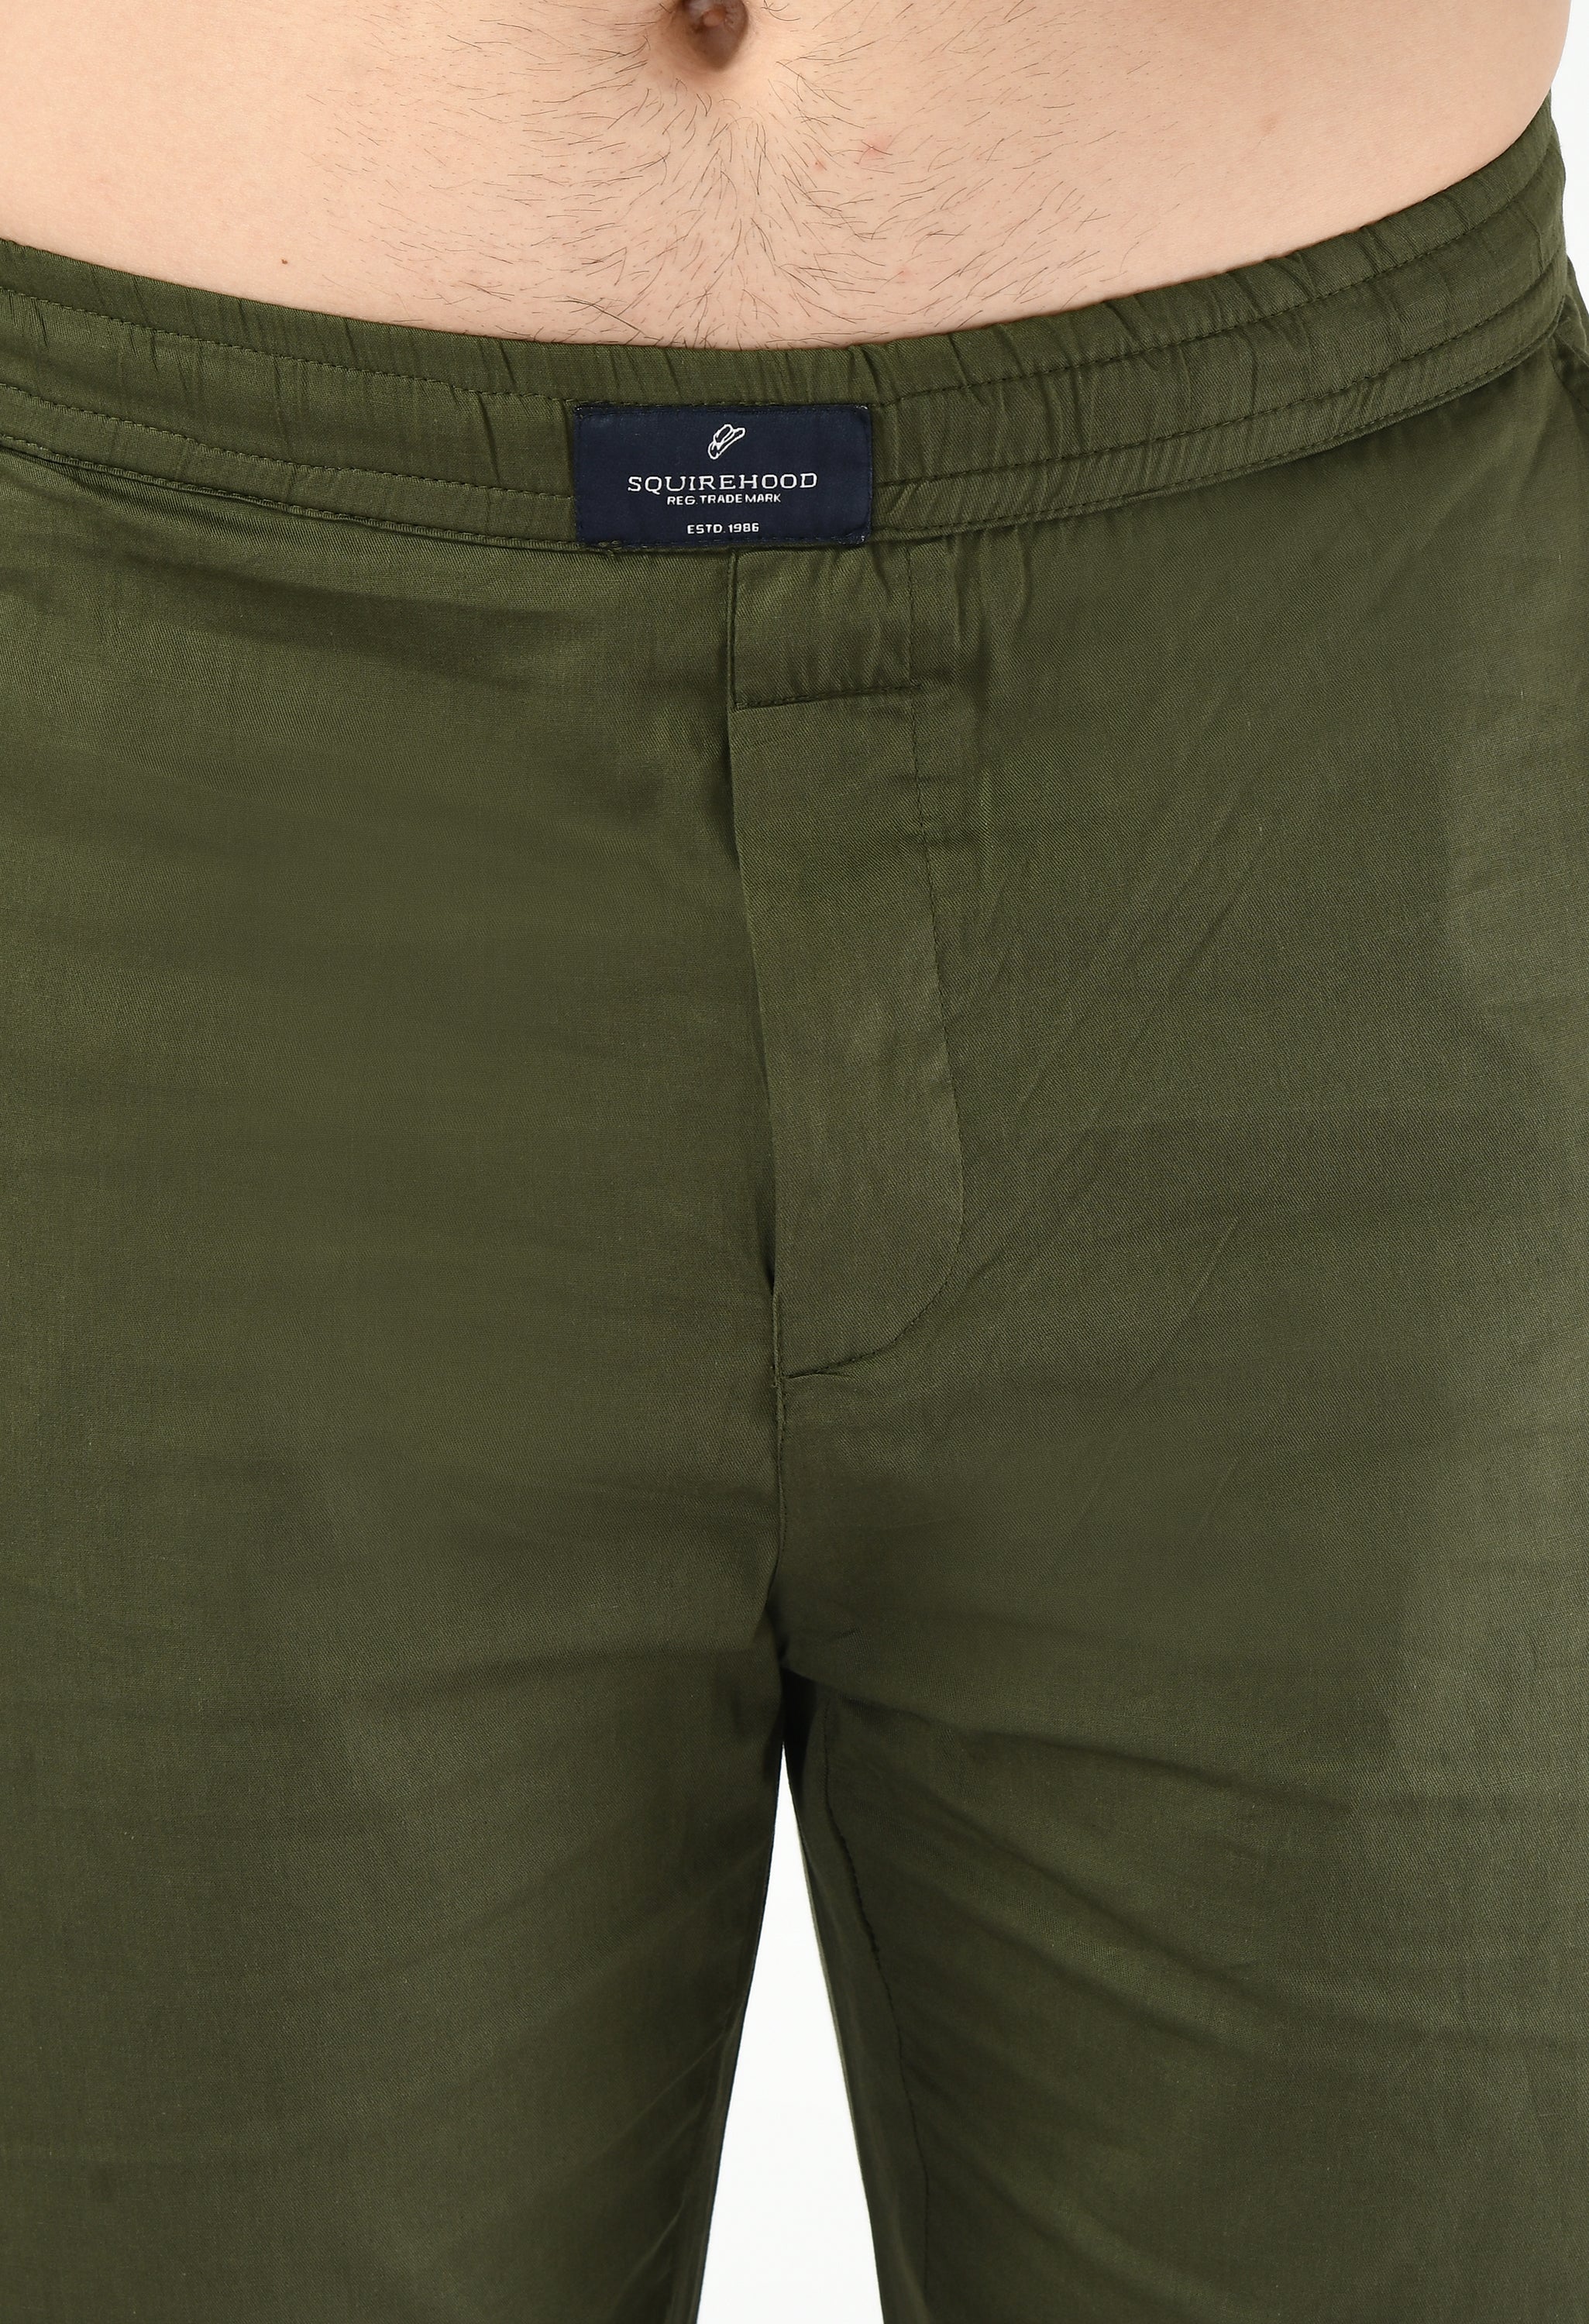 Olive Solid Cotton Twill Men's Trouser